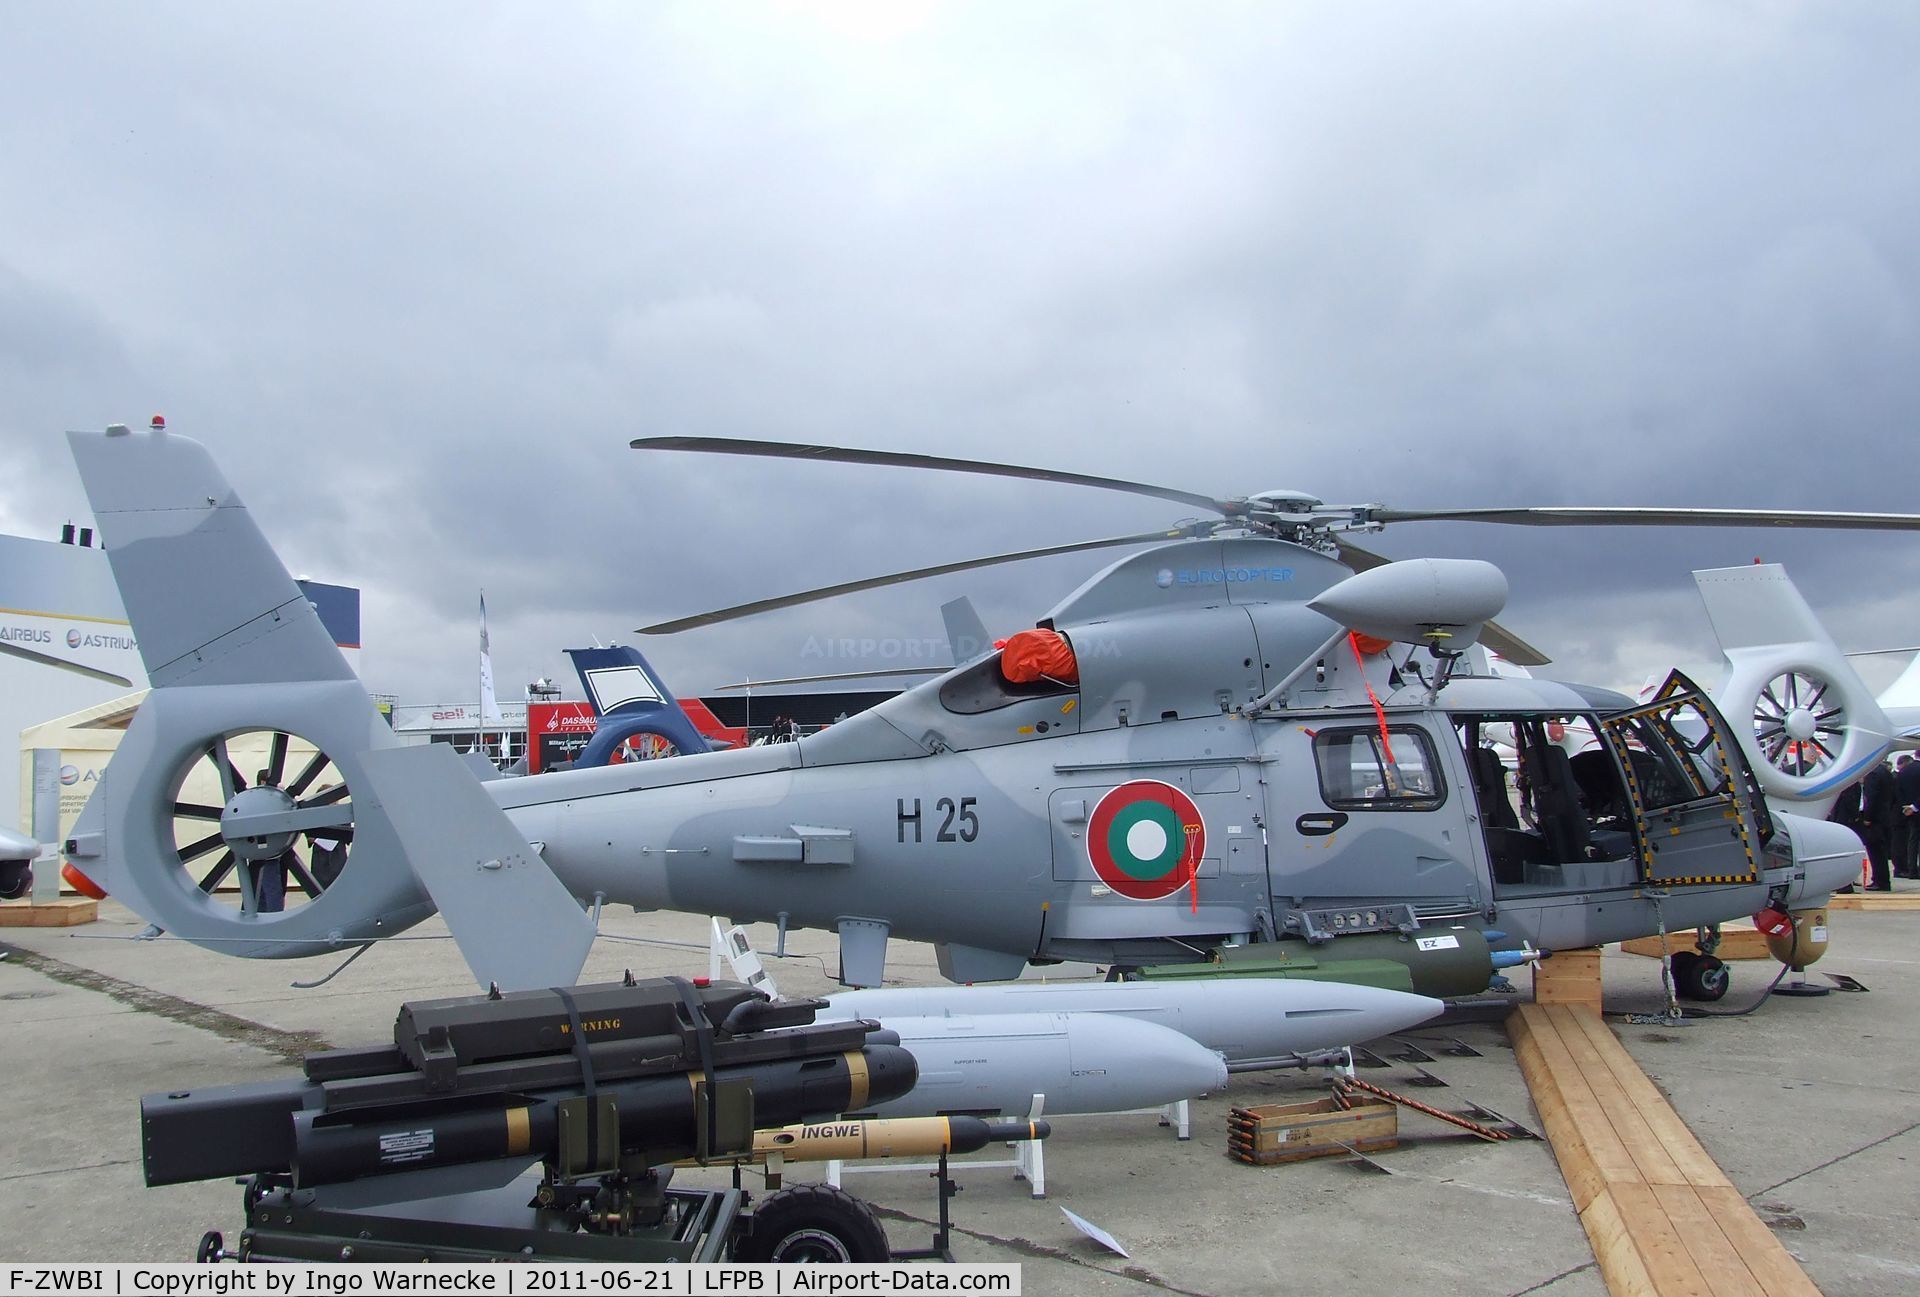 F-ZWBI, Eurocopter AS-565MB Panther C/N 6866, Eurocopter AS.565MB Panther in the colours of the bulgarian navy at the Aerosalon 2011, Paris